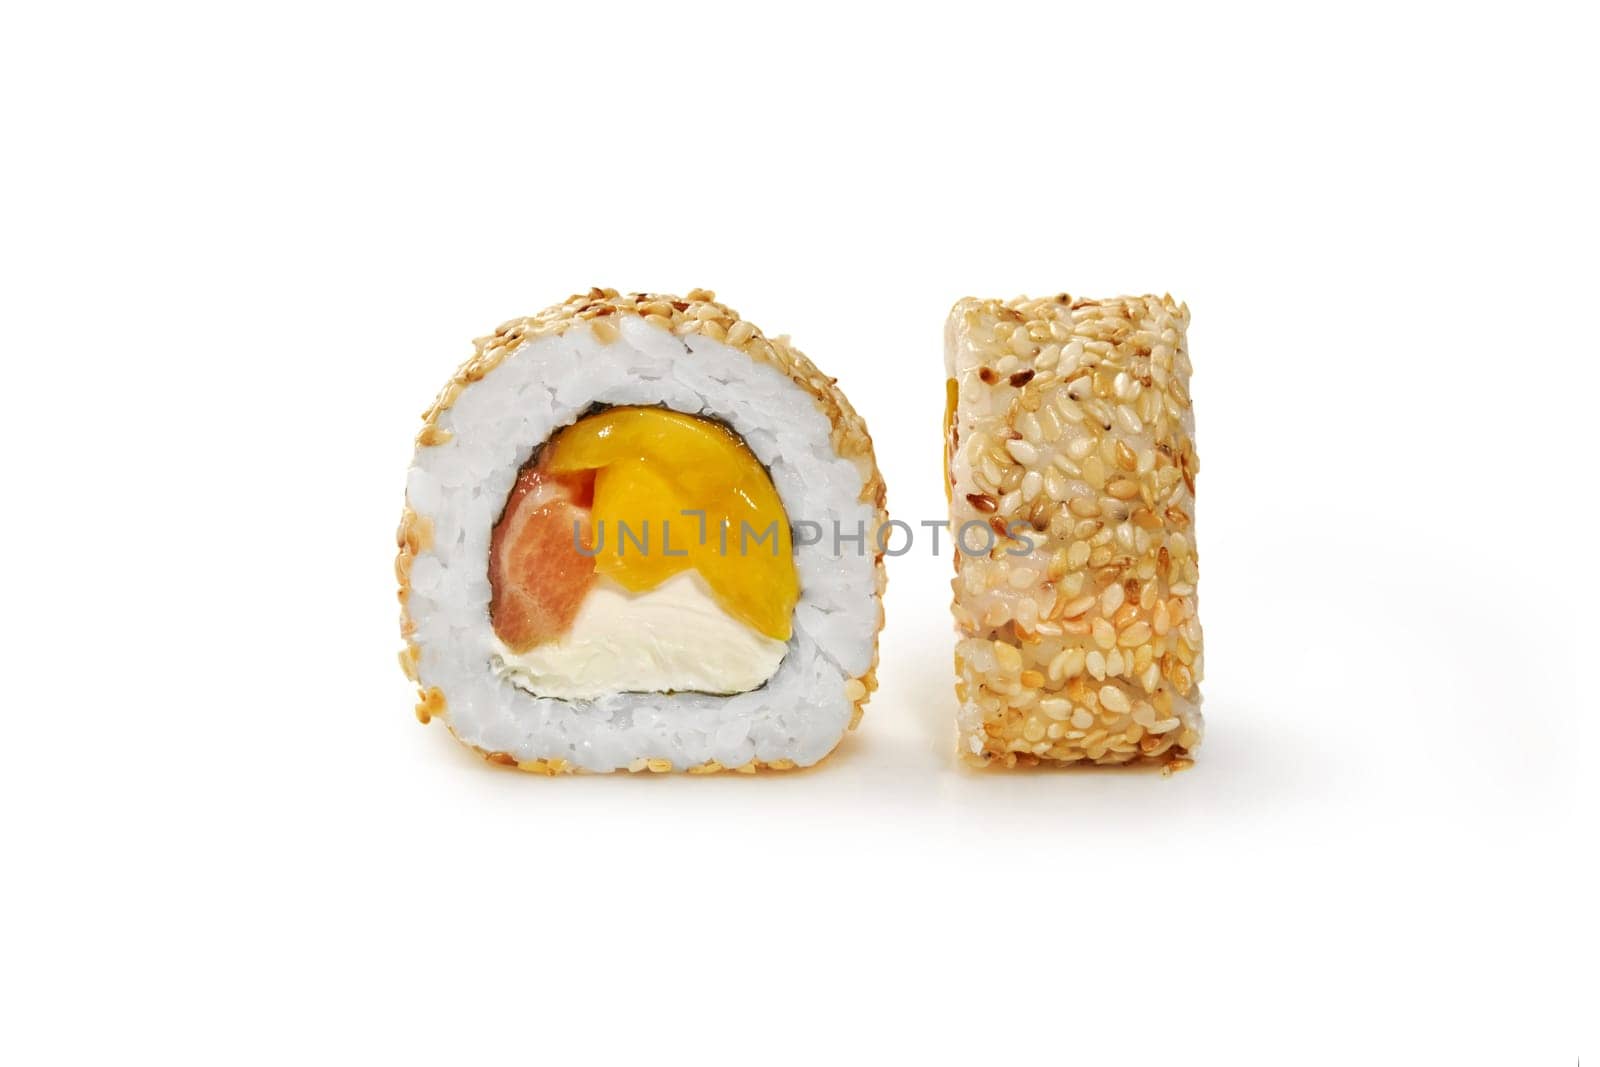 Exotic sweet and savory sushi roll filled with salmon, delicate cream cheese and ripe mango slices, generously sprinkled with sesame seeds presented on white background. Japanese style cuisine